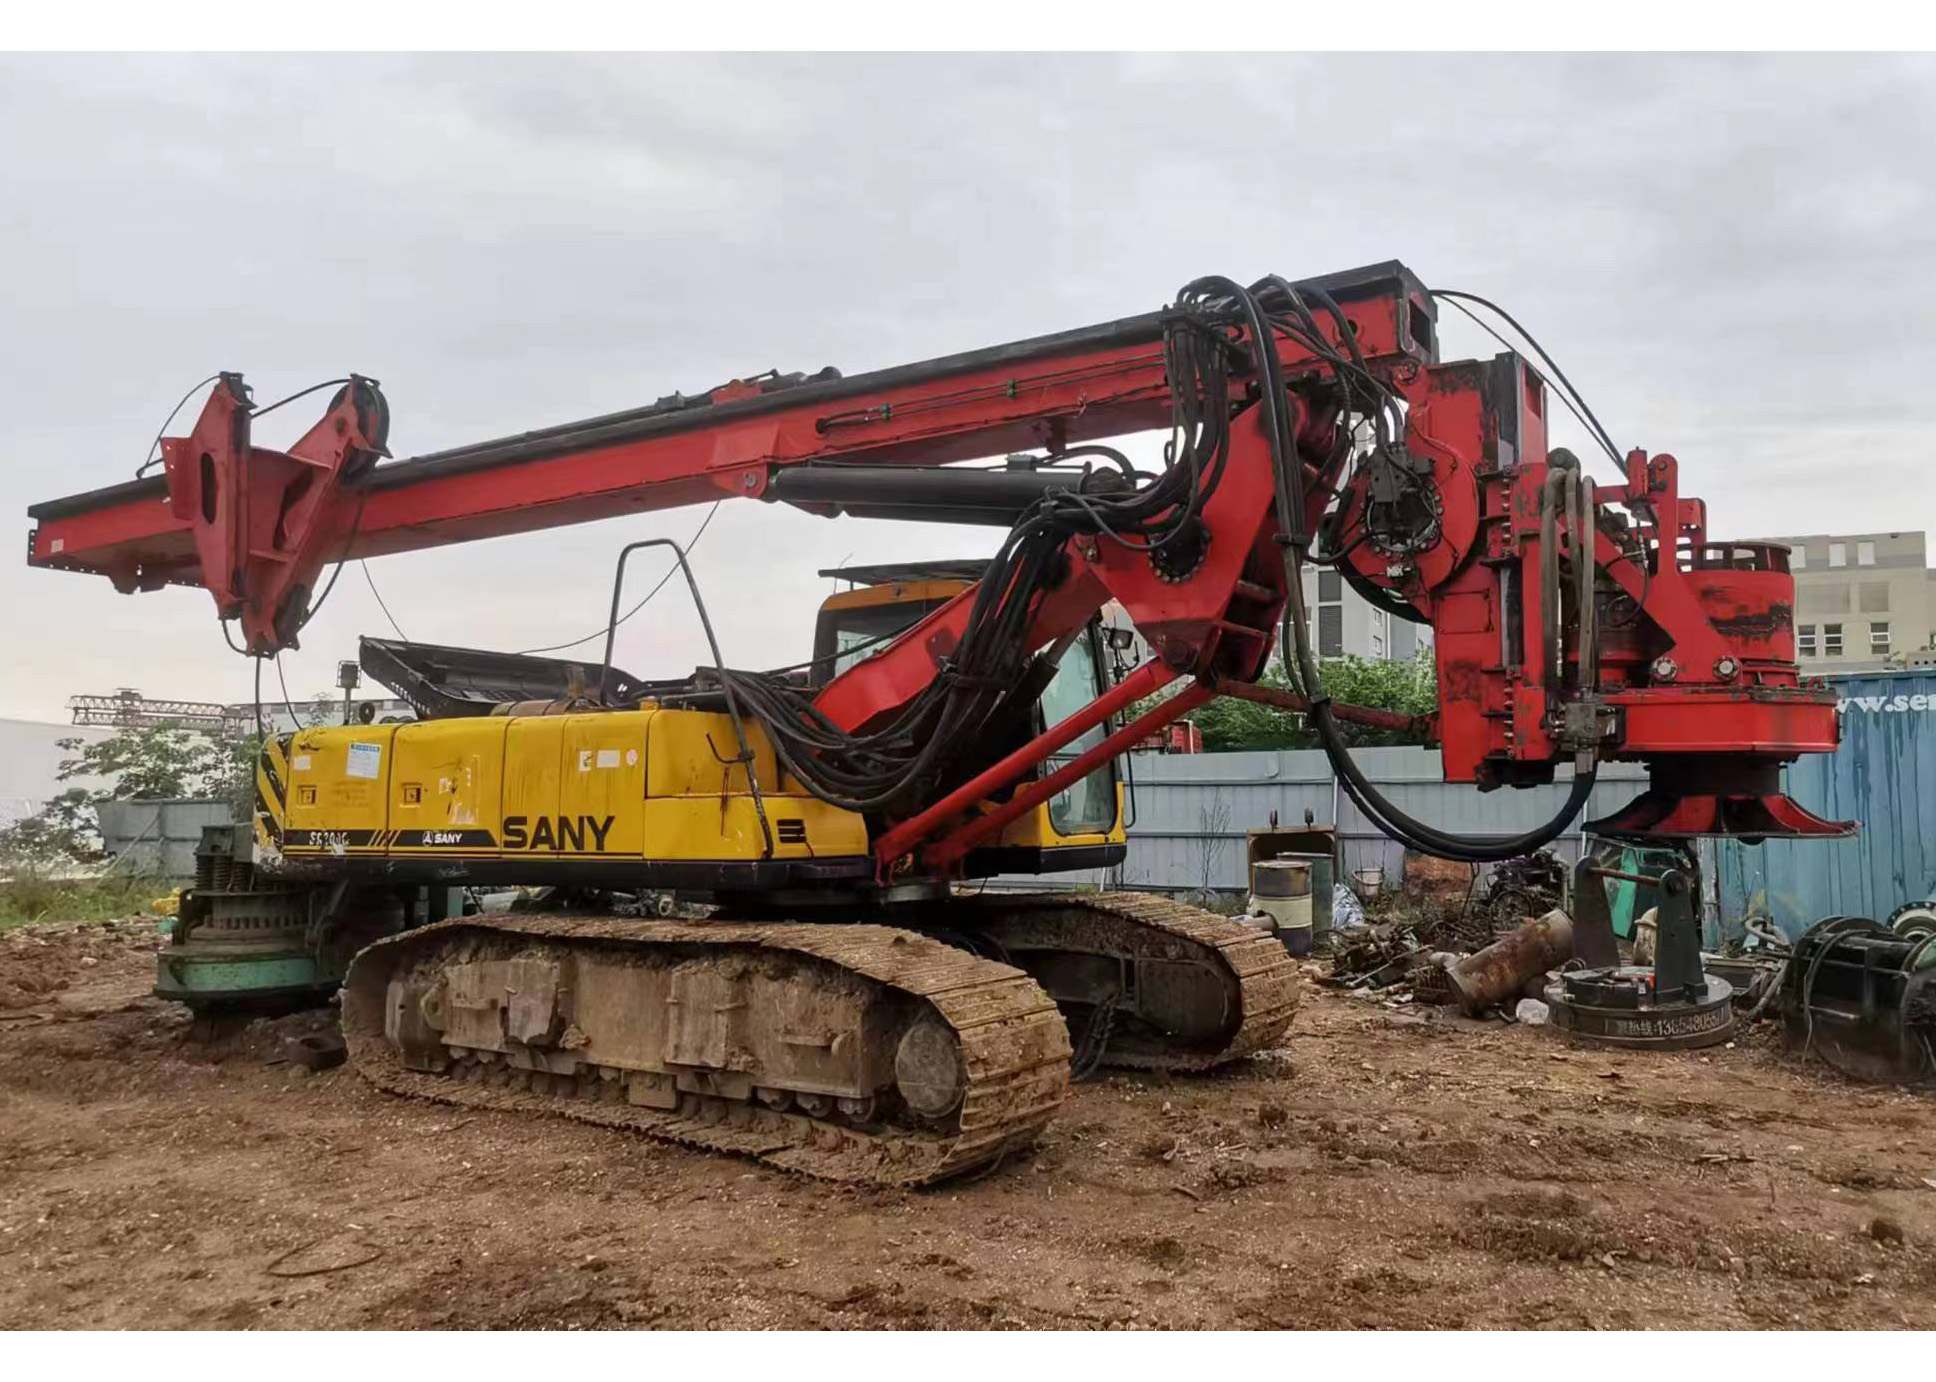 SANY: Everything You Need to Know About Their Rotary Drilling Rigs